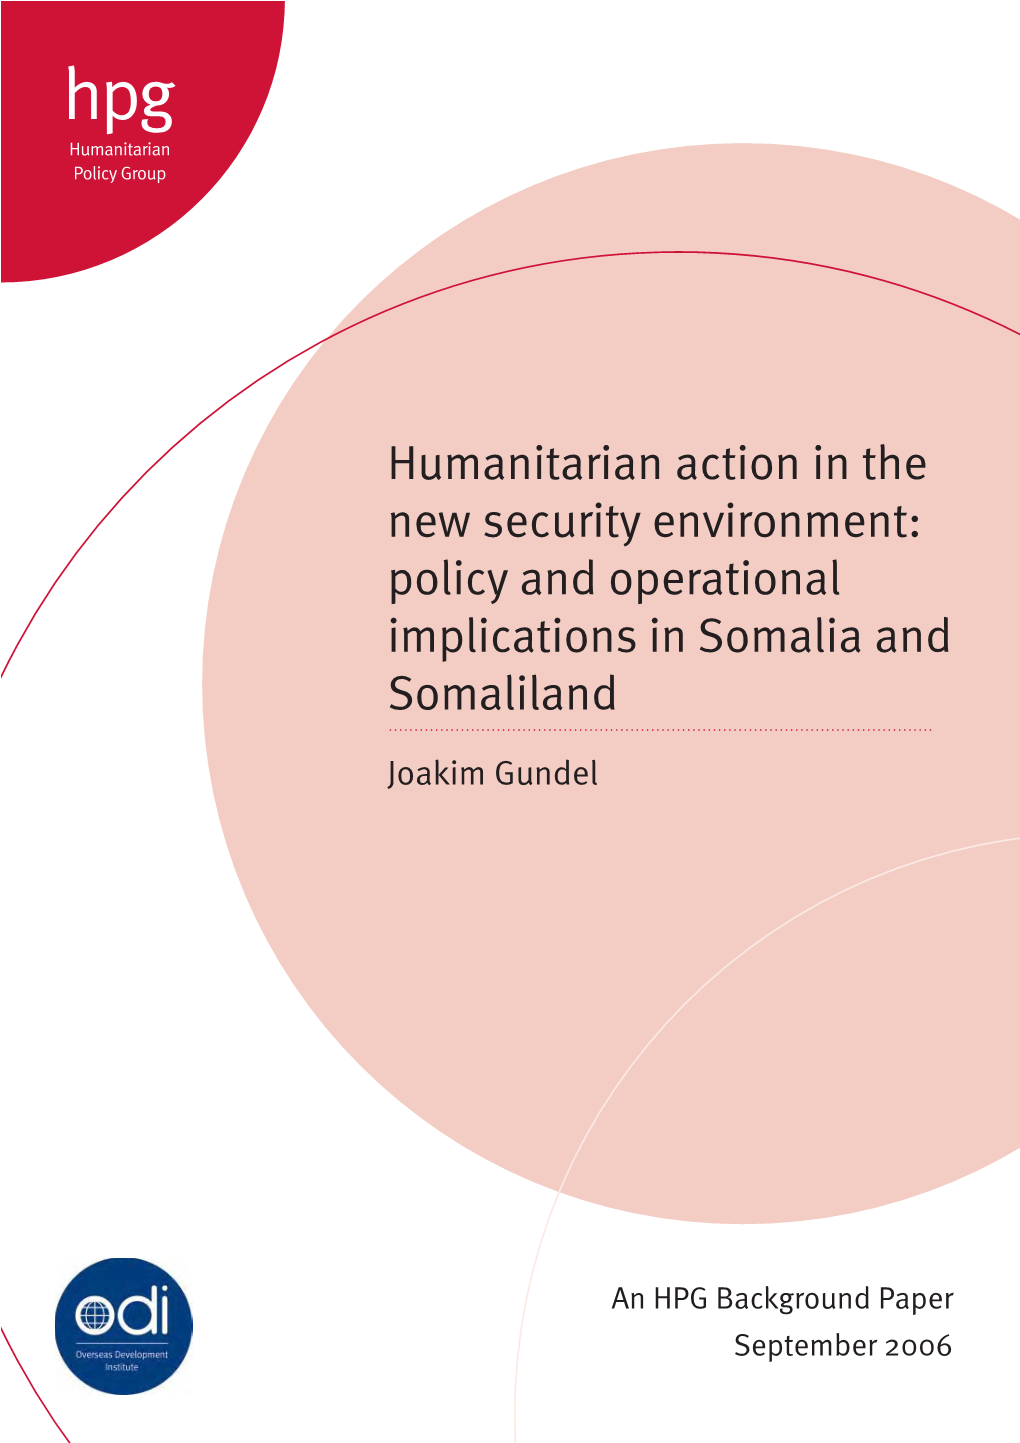 Humanitarian Action in the New Security Environment: Policy and Operational Implications in Somalia and Somaliland